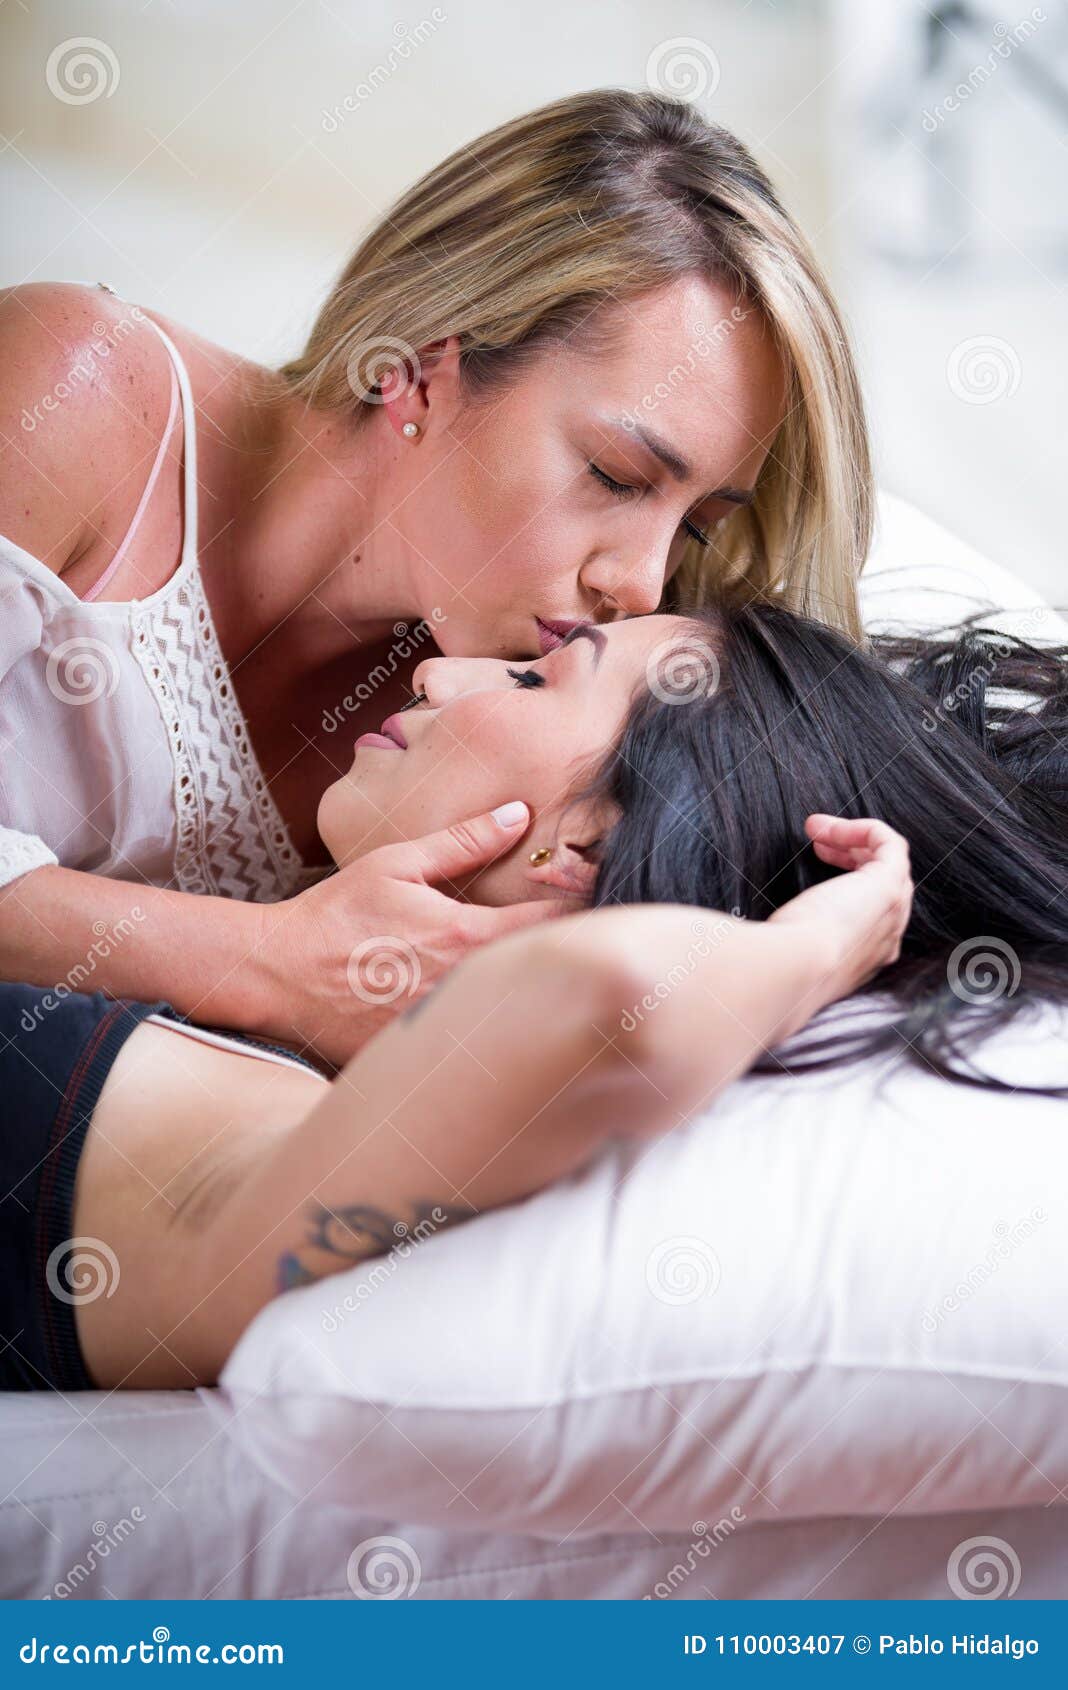 Hot Blonde Girls Making Out underwood pictures